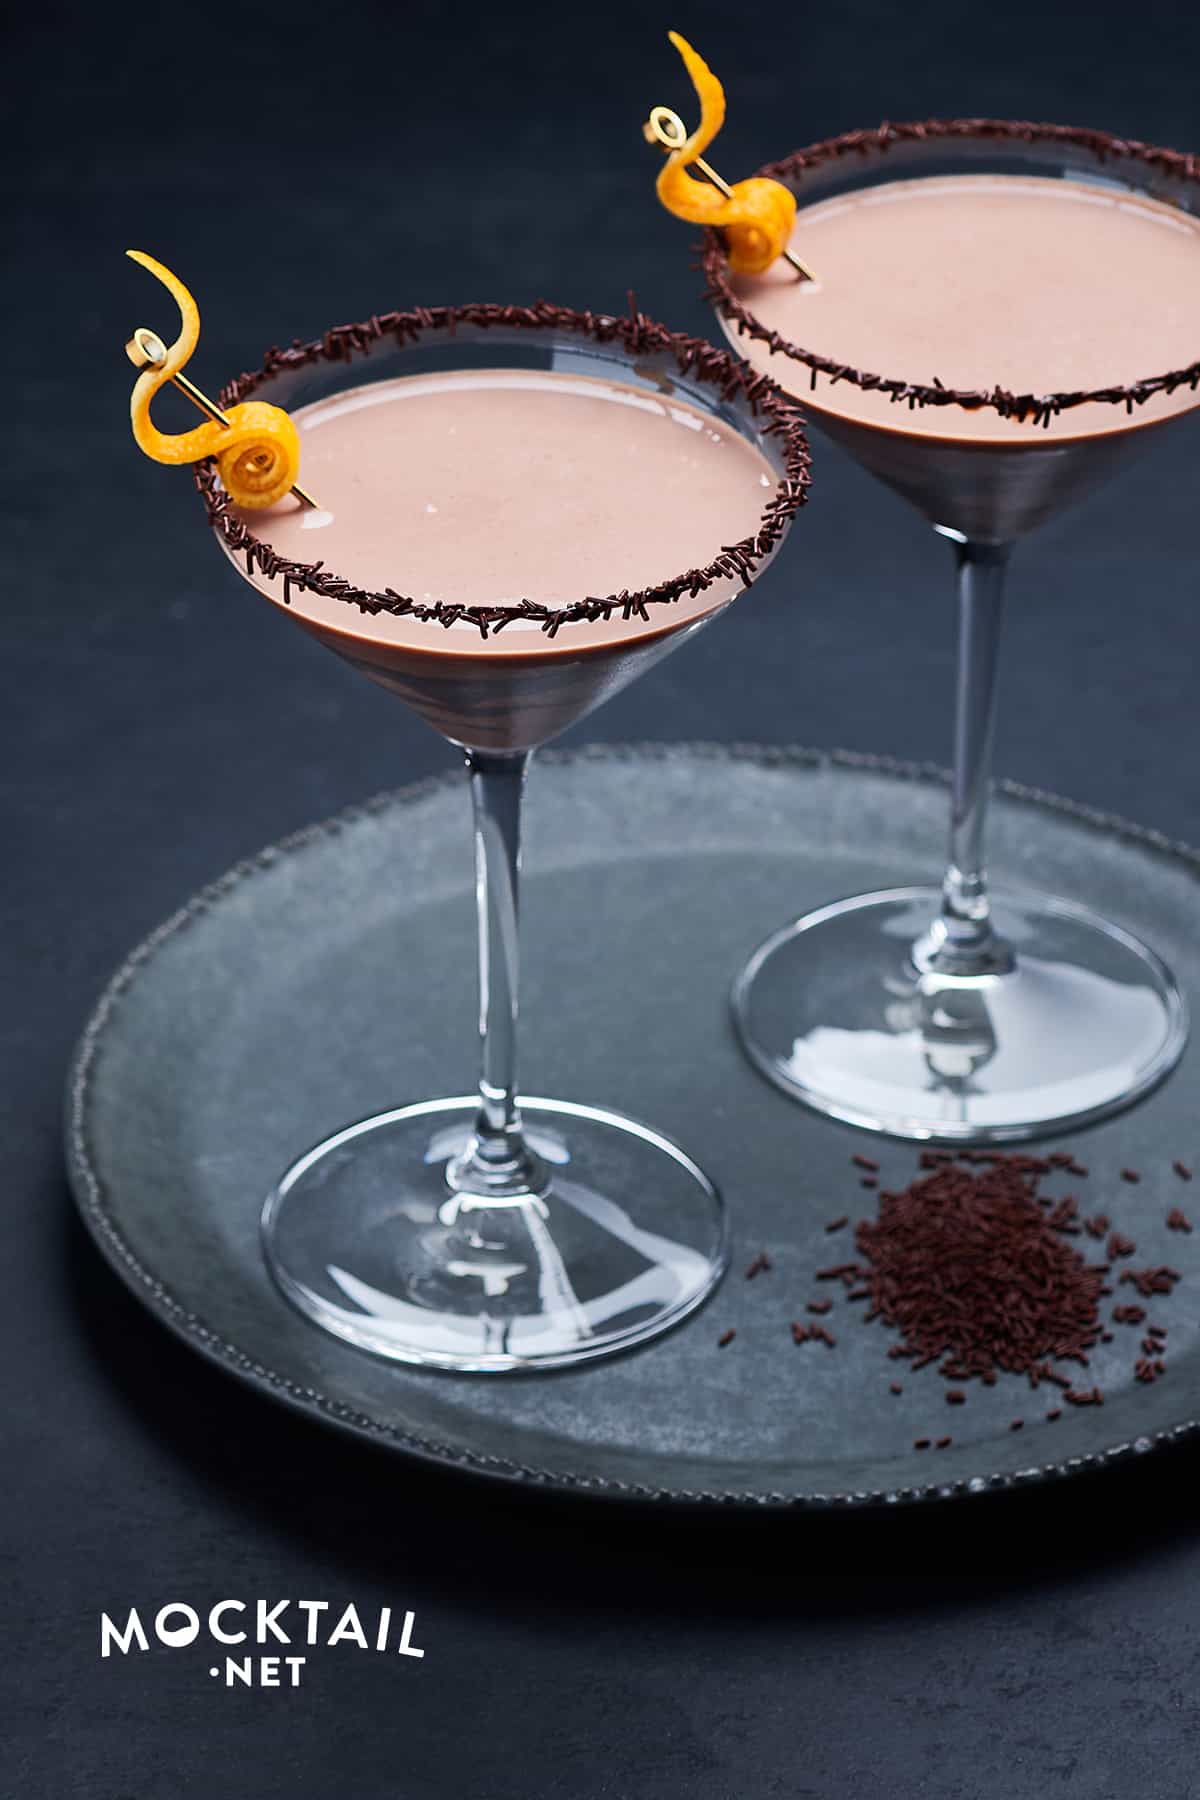 What is in a Chocolate Mocktail